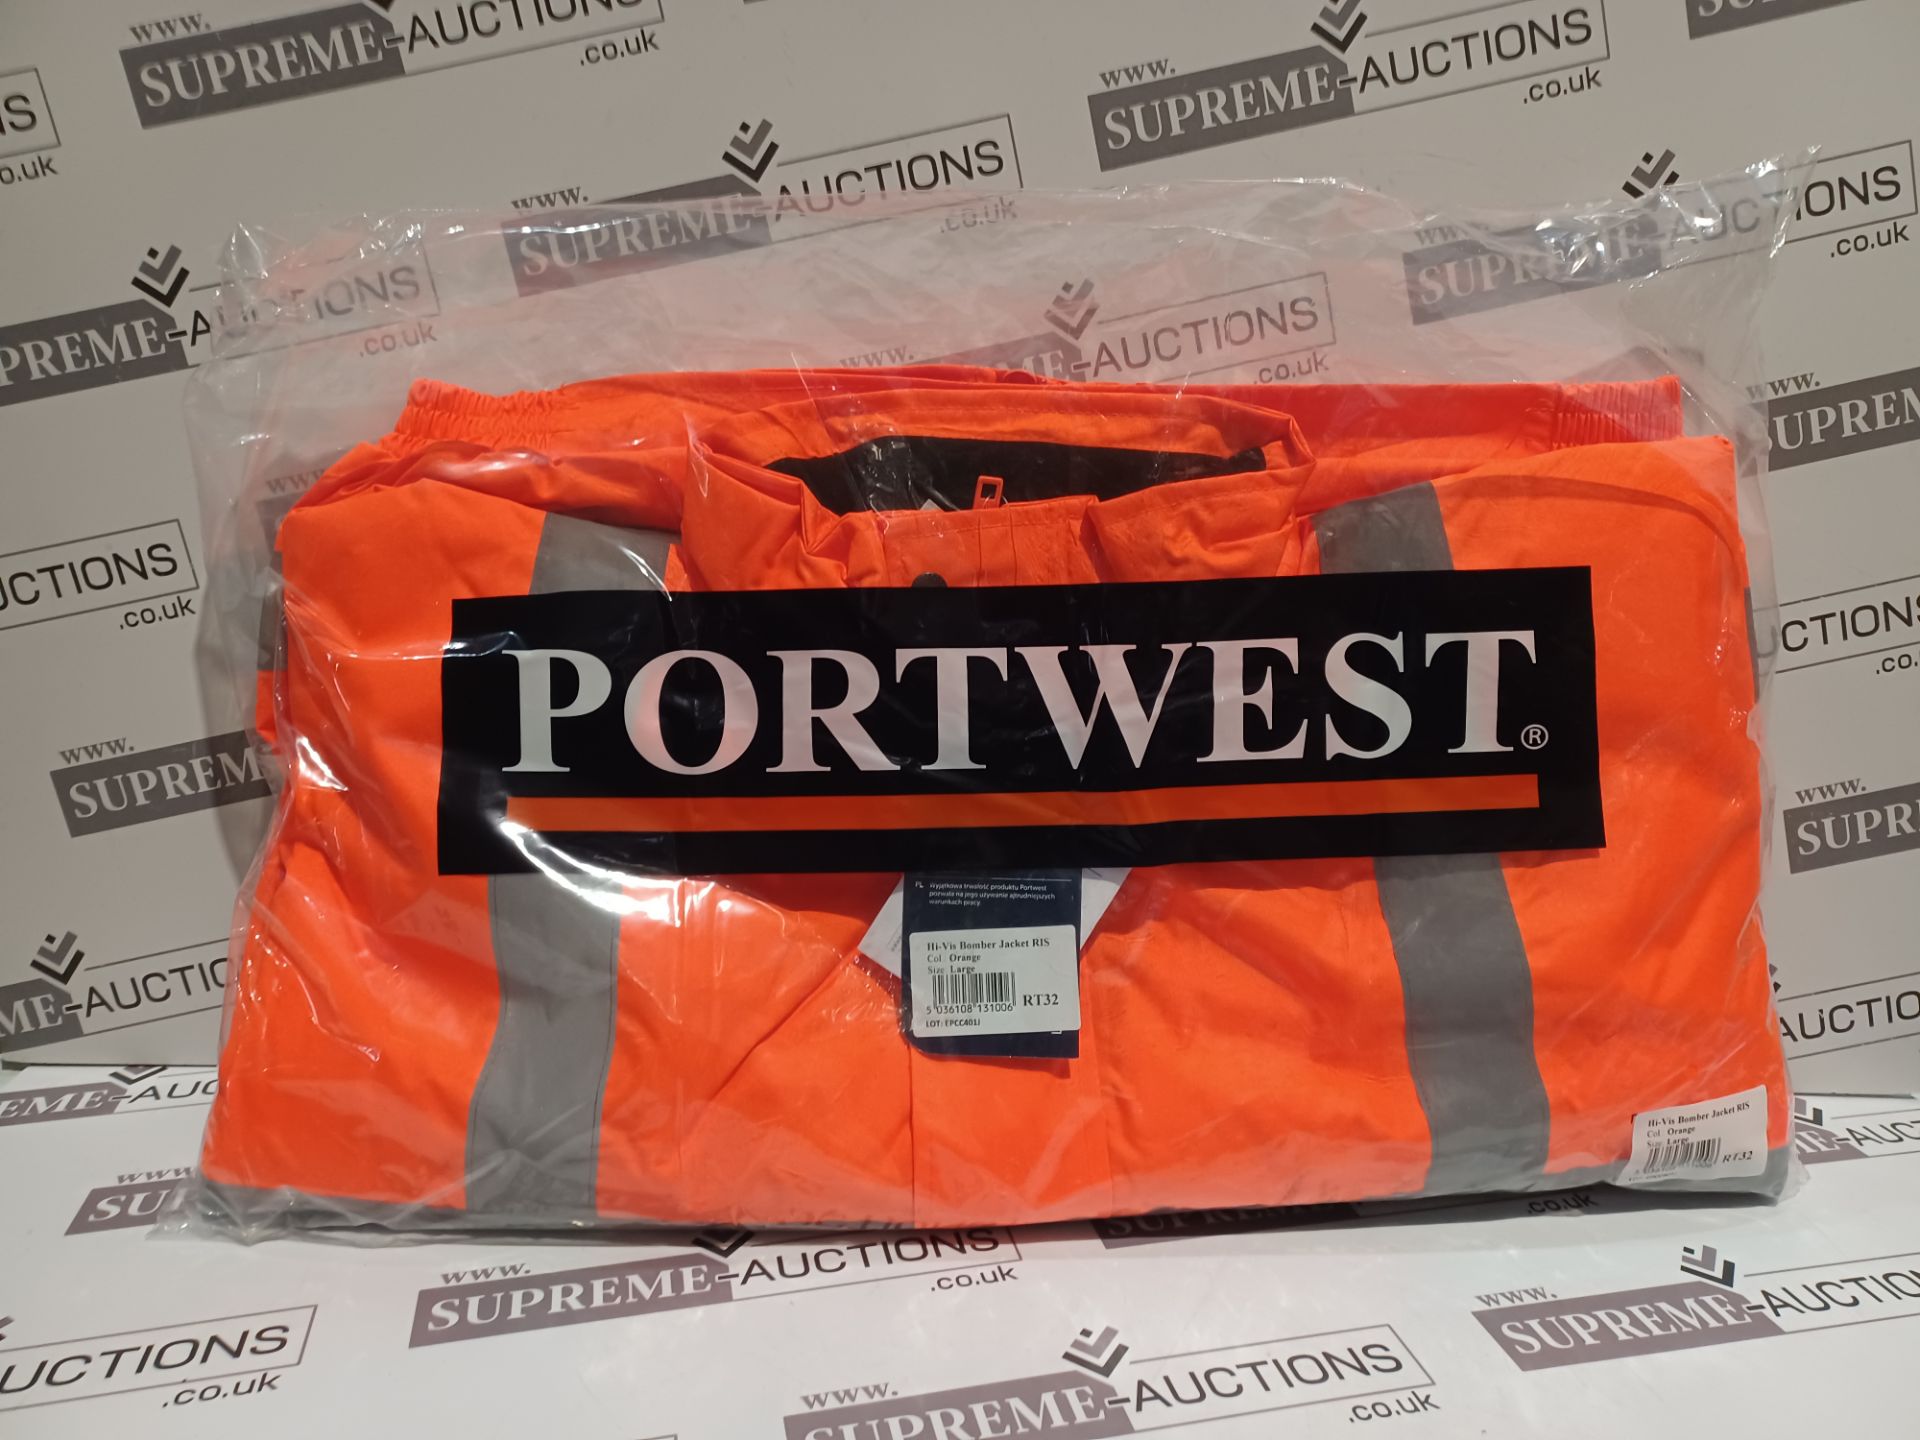 10 X BRAND NEW PORTWEST PROFESSIONAL WORK JACKETS SIZE LARGE R13-5